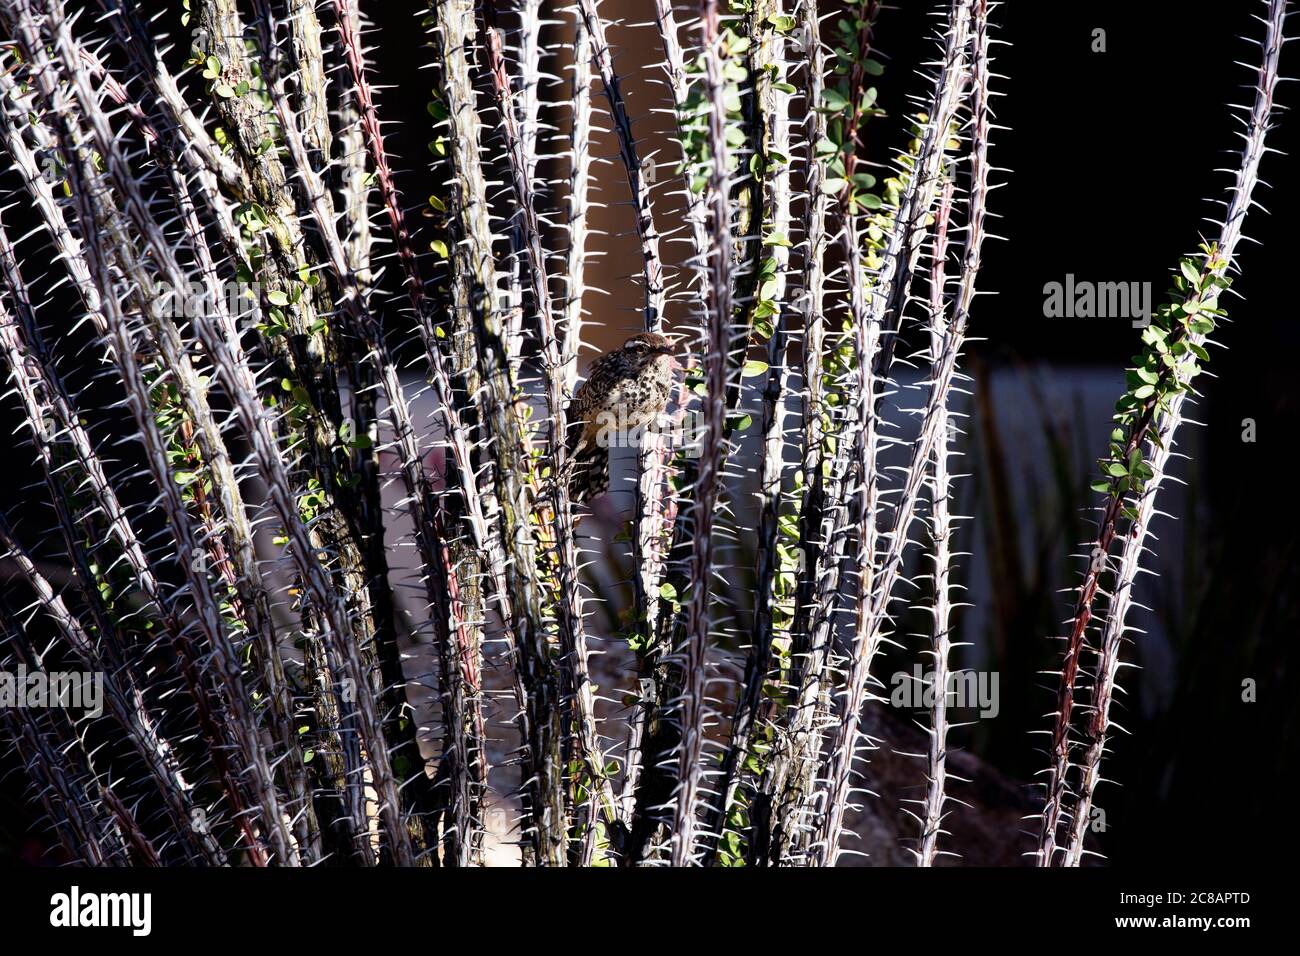 Cactus wren hides in the camouflage and protective thorns of mature ocotillo in Arizona Stock Photo